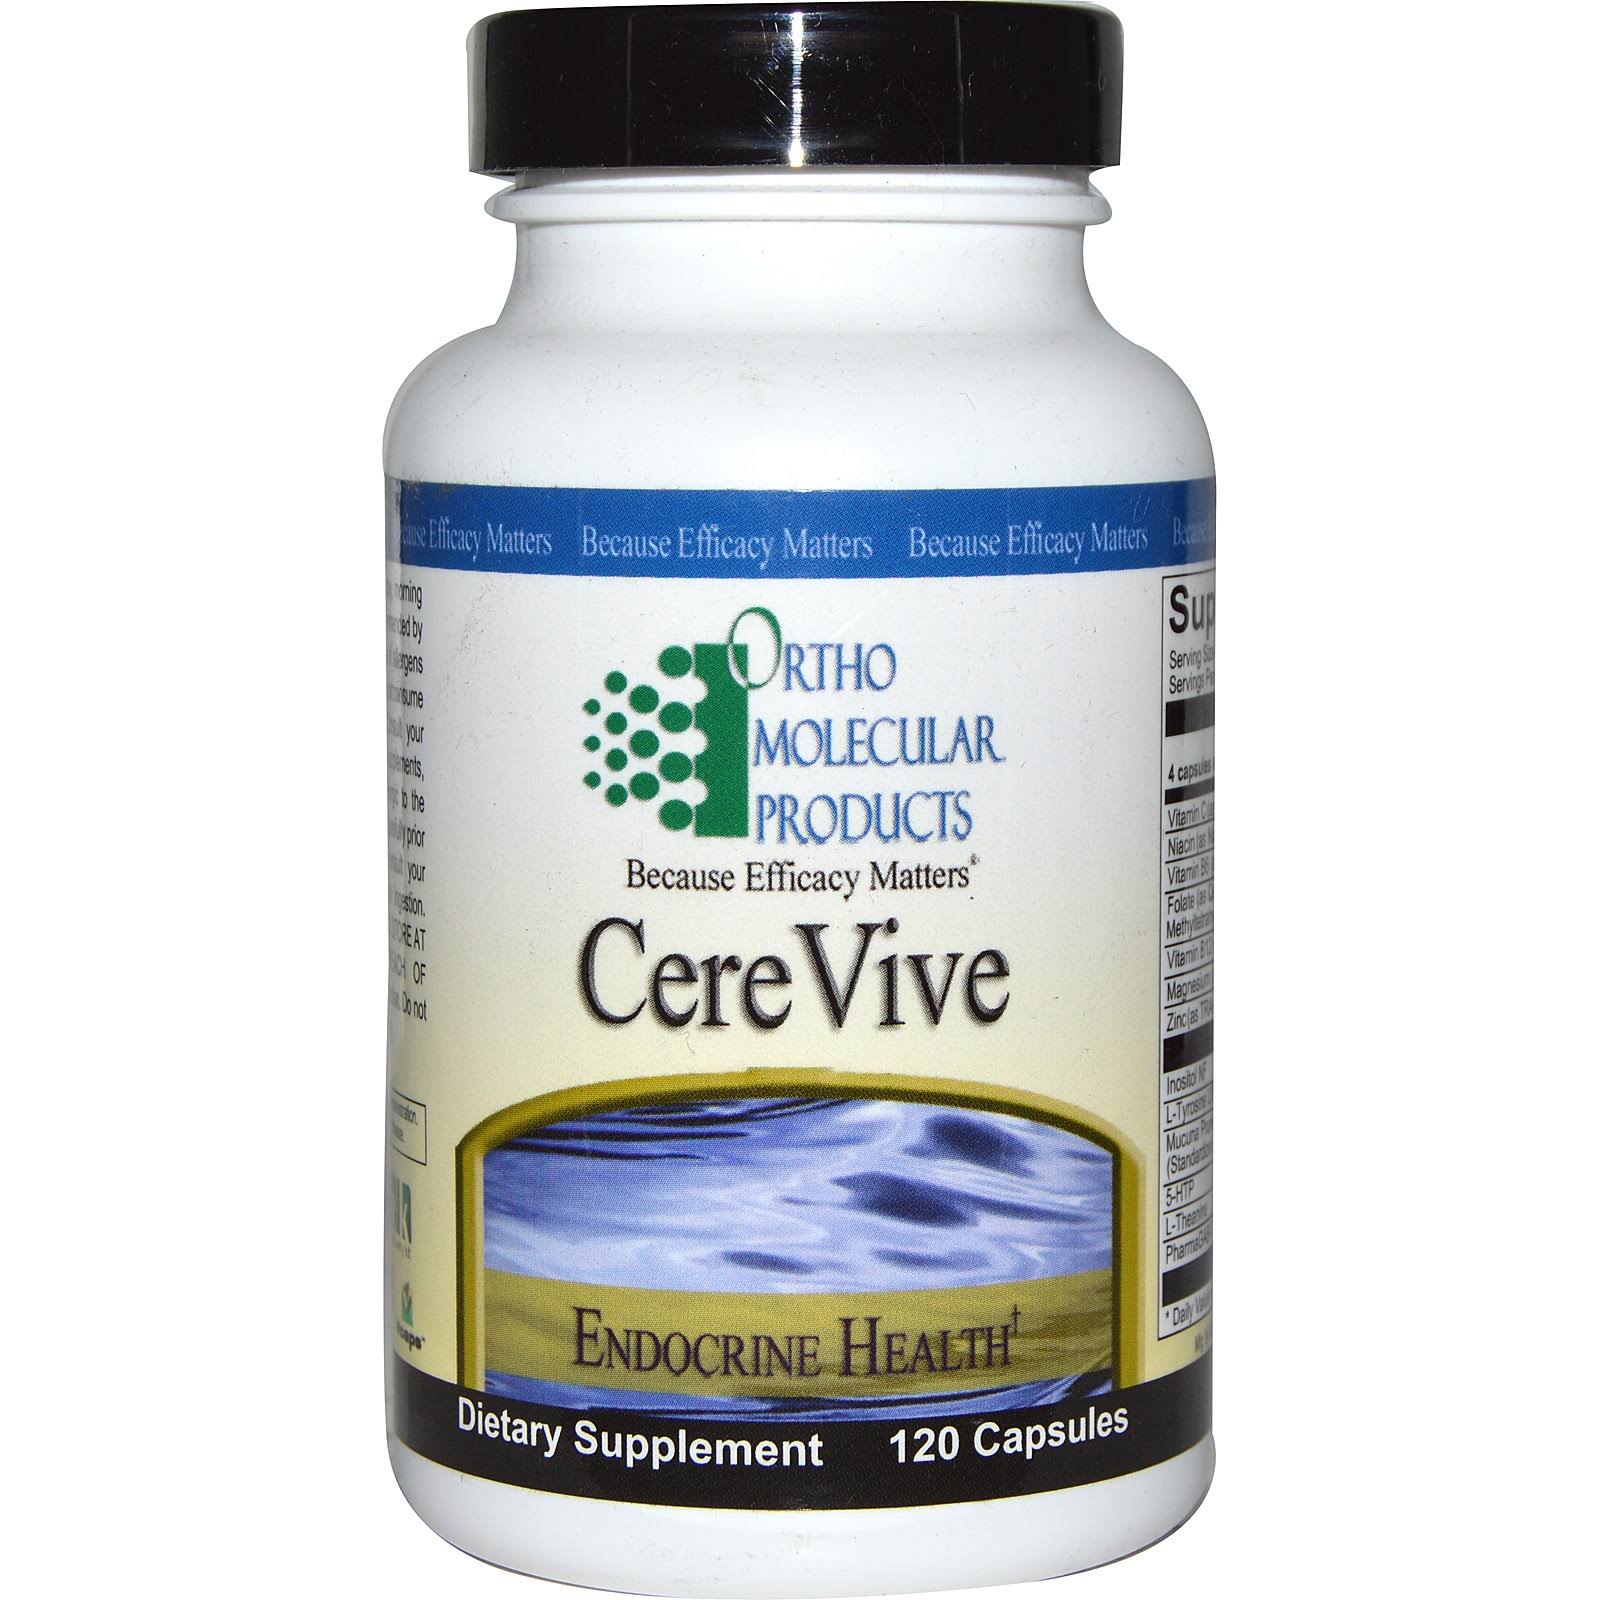 Ortho Molecular Products, CereVive, Endocrine Health, 120 Caps